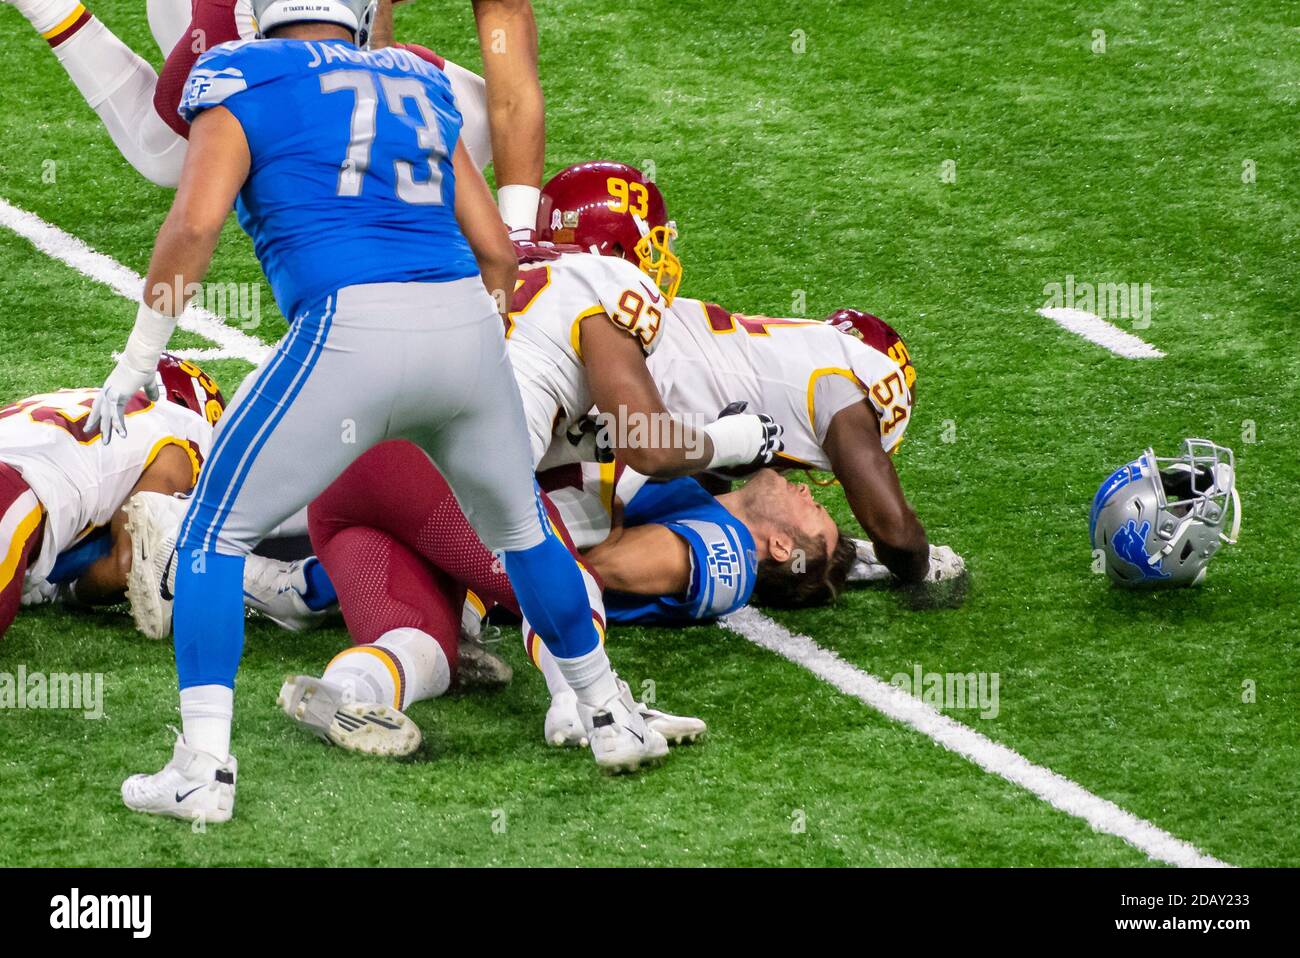 DETROIT, MI - NOVEMBER 15: Detroit Lions QB Matthew Stafford (9) has his helmet knocked off by the tackle from Washington Football Team LB Kevin Pierre-Louis (54) during NFL game between Washington Football Team and Detroit Lions on November 15, 2020 at Ford Field in Detroit, MI (Photo by Allan Dranberg/Cal Sport Media) Stock Photo